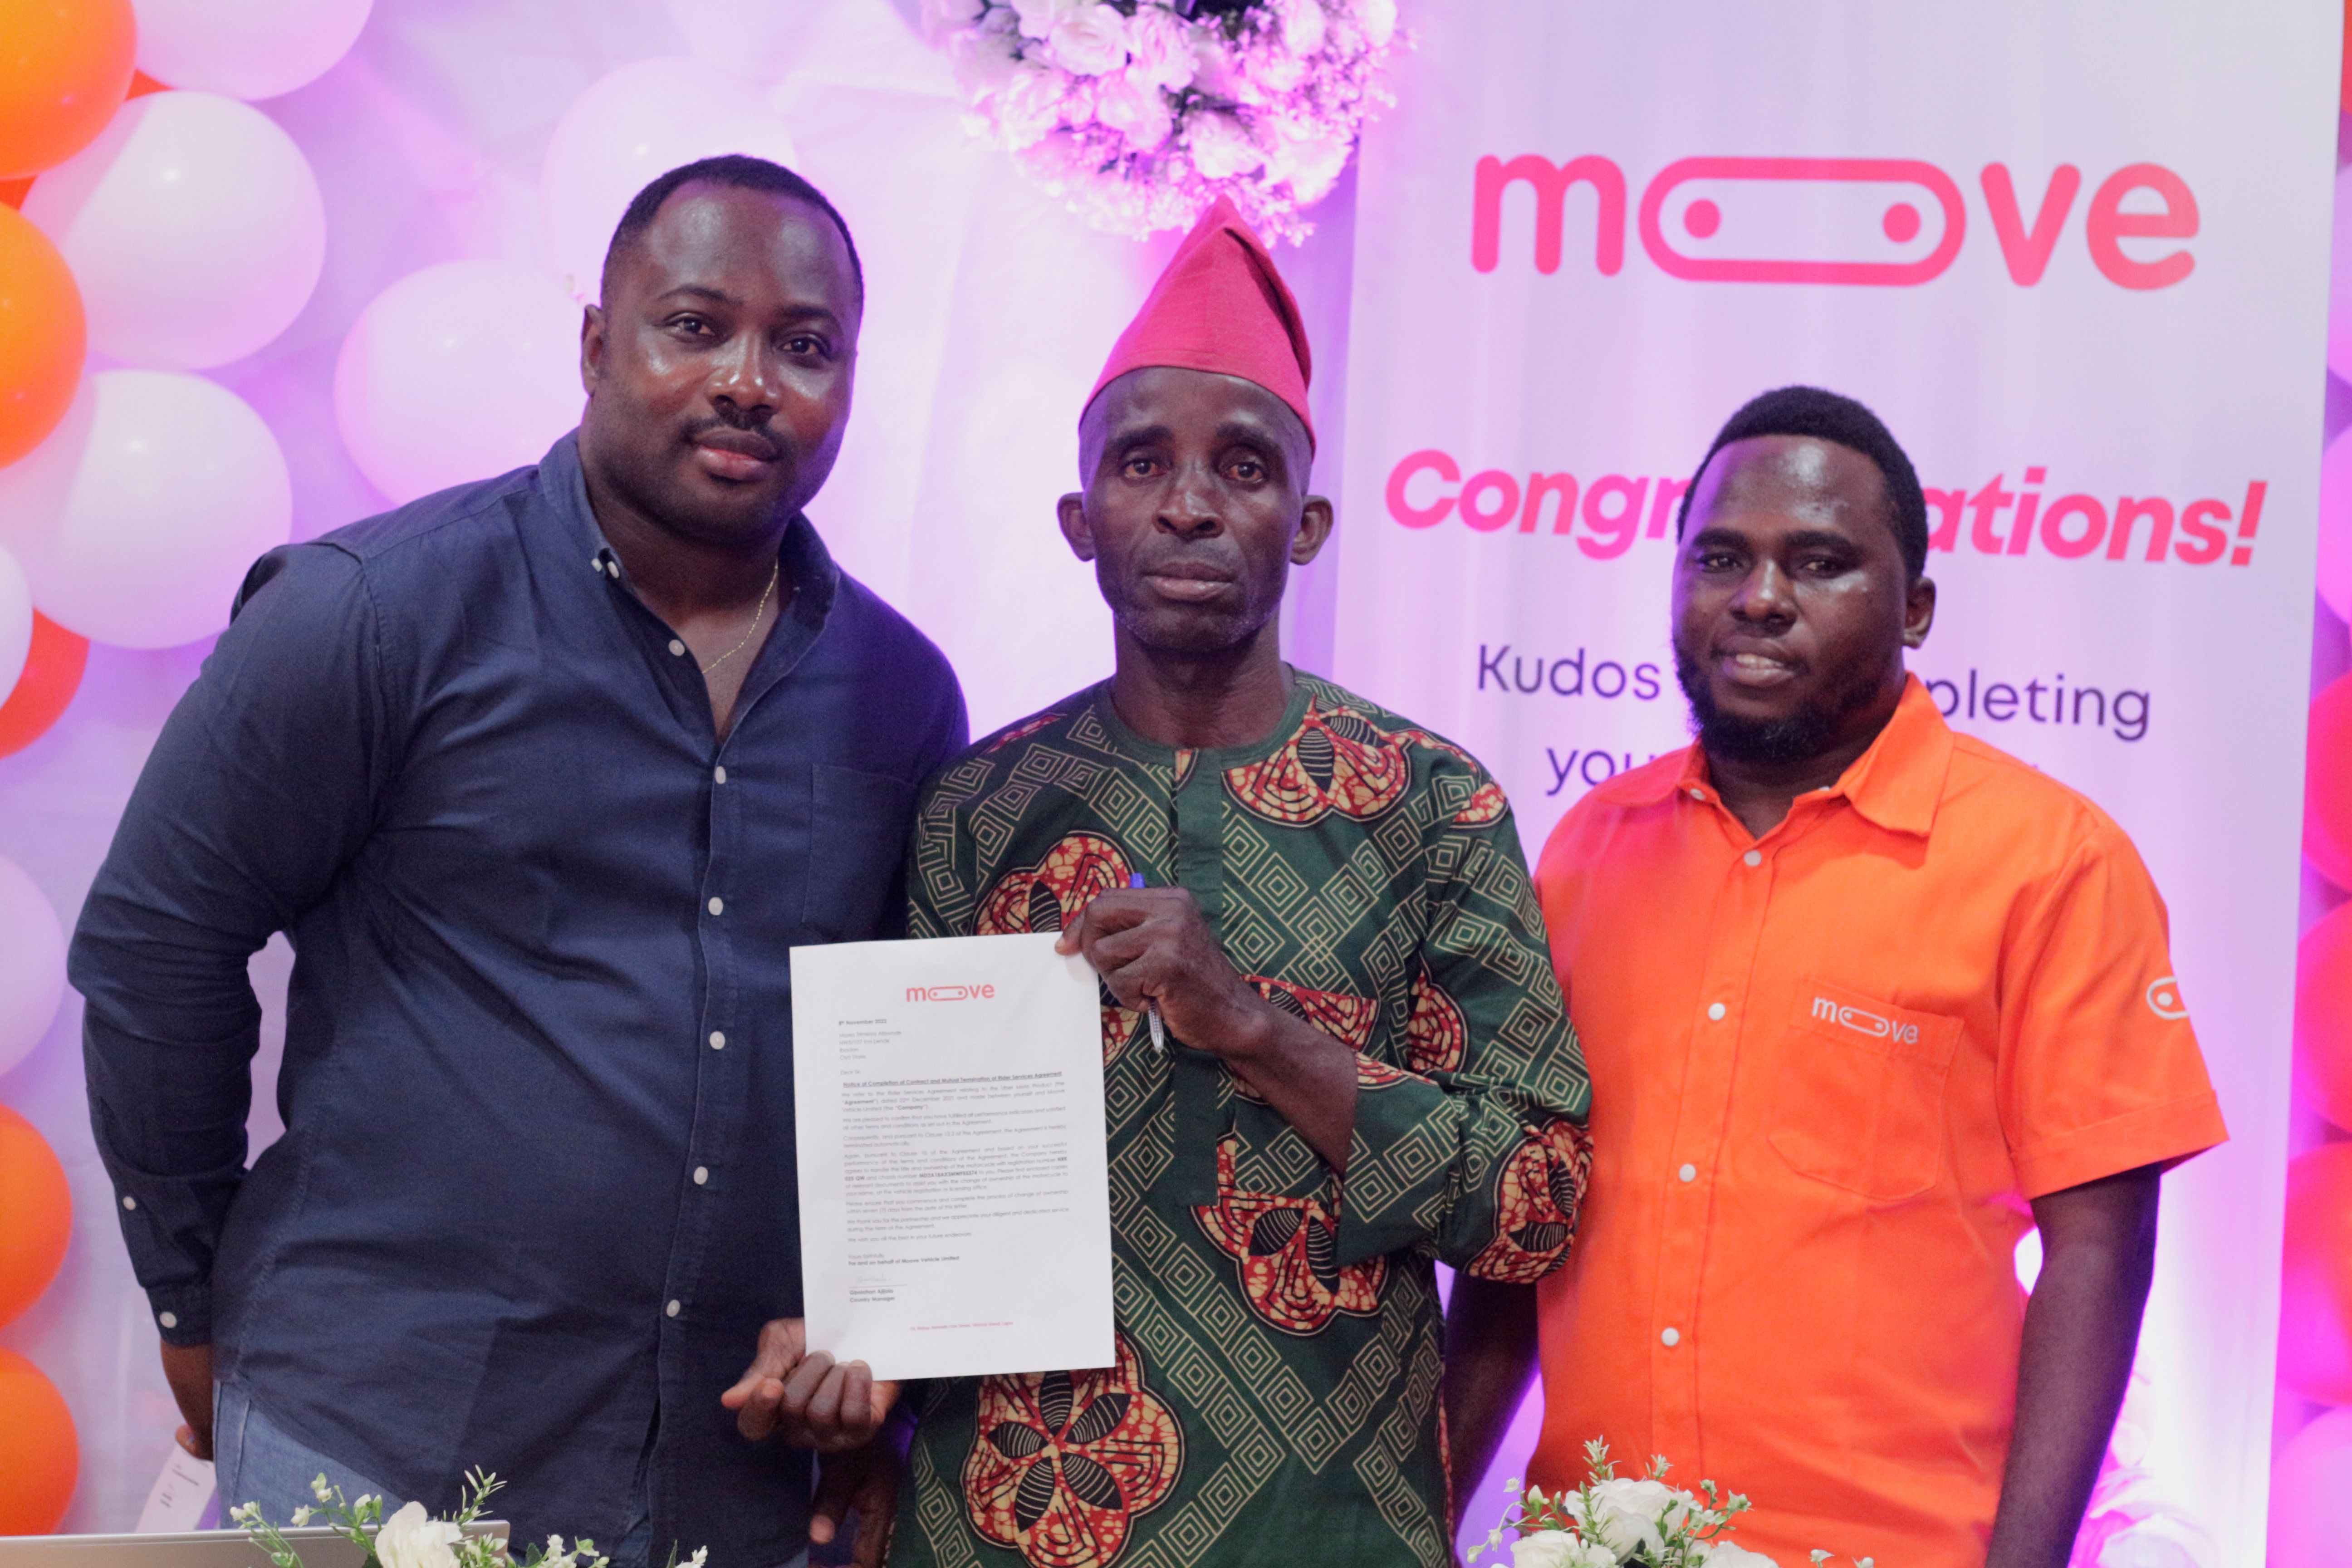 Moove Customers in Ibadan, Nigeria celebrating full ownership of their vehicles. L to R: Kelechi Eze, Legal Counsel for Moove, Moses Trimisiyu Alawode, Moove customer, and Gbolahan Ajijola, Mooves Country Manager for Nigeria.